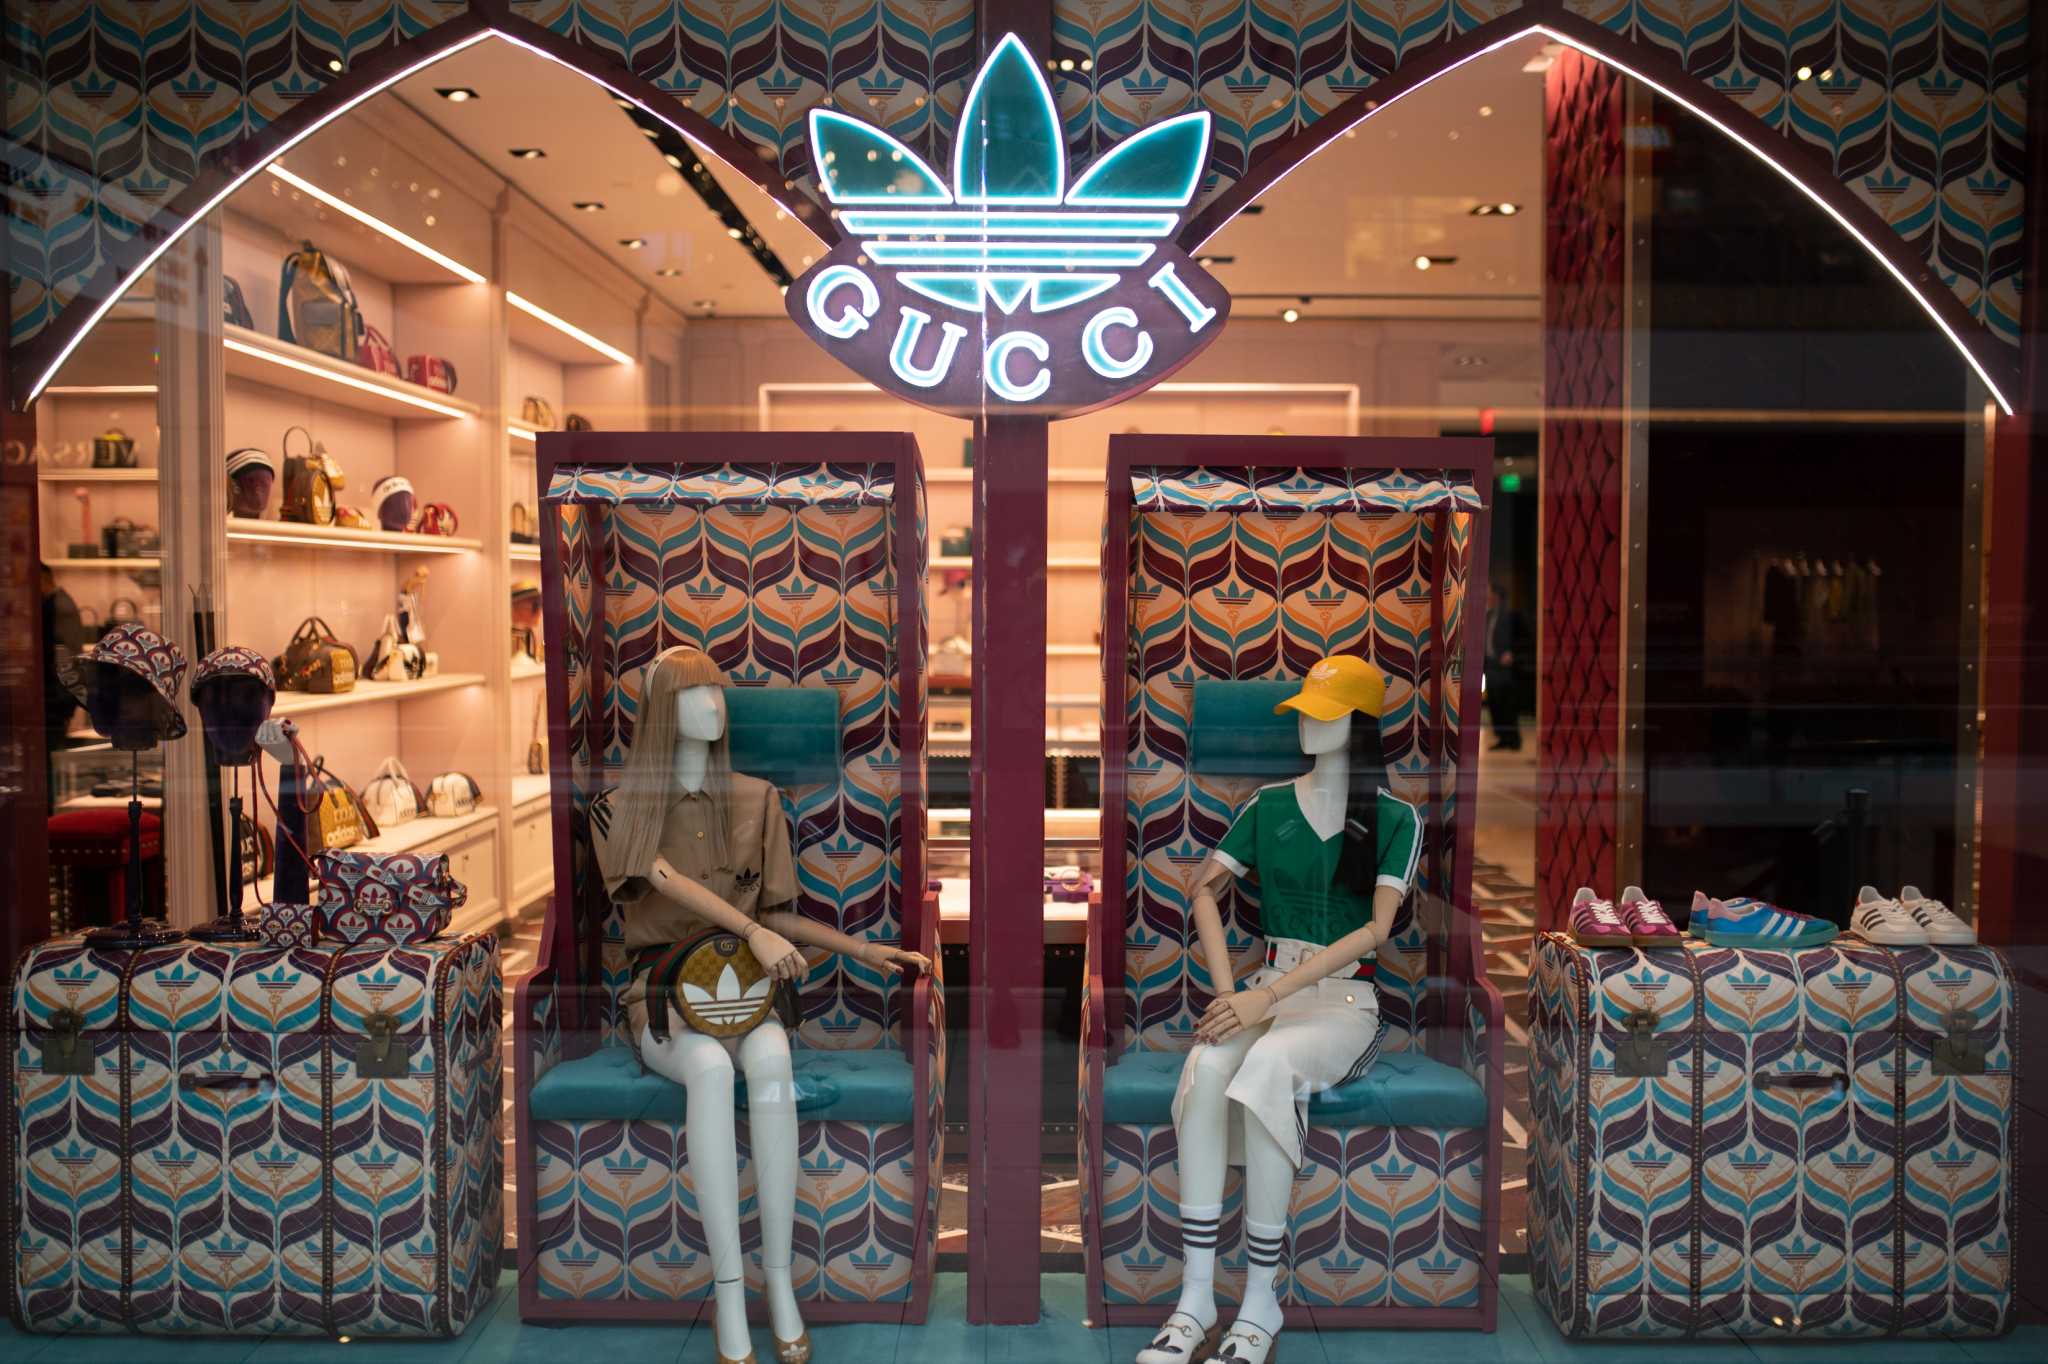 Gucci x adidas Pop-up Experience